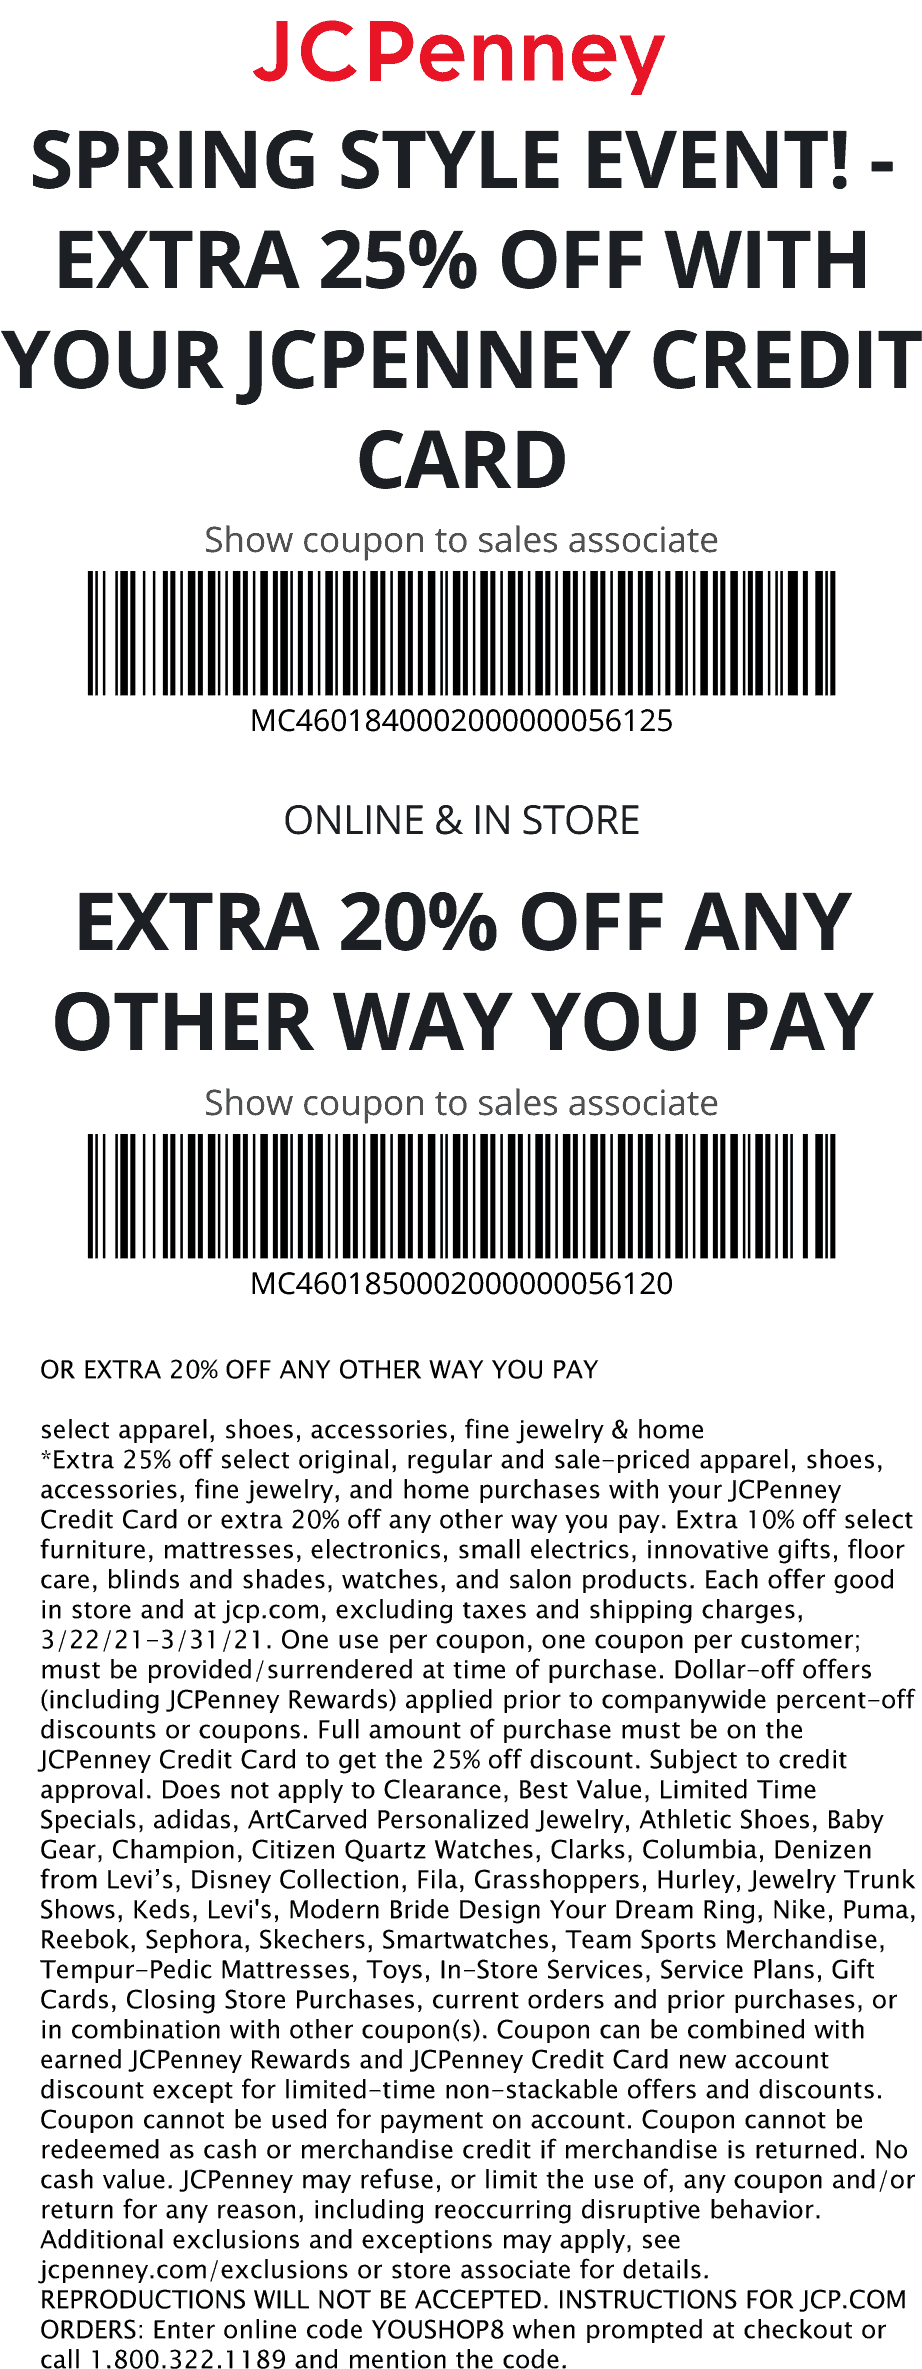 20 off today at JCPenney, or online via promo code jcpenney